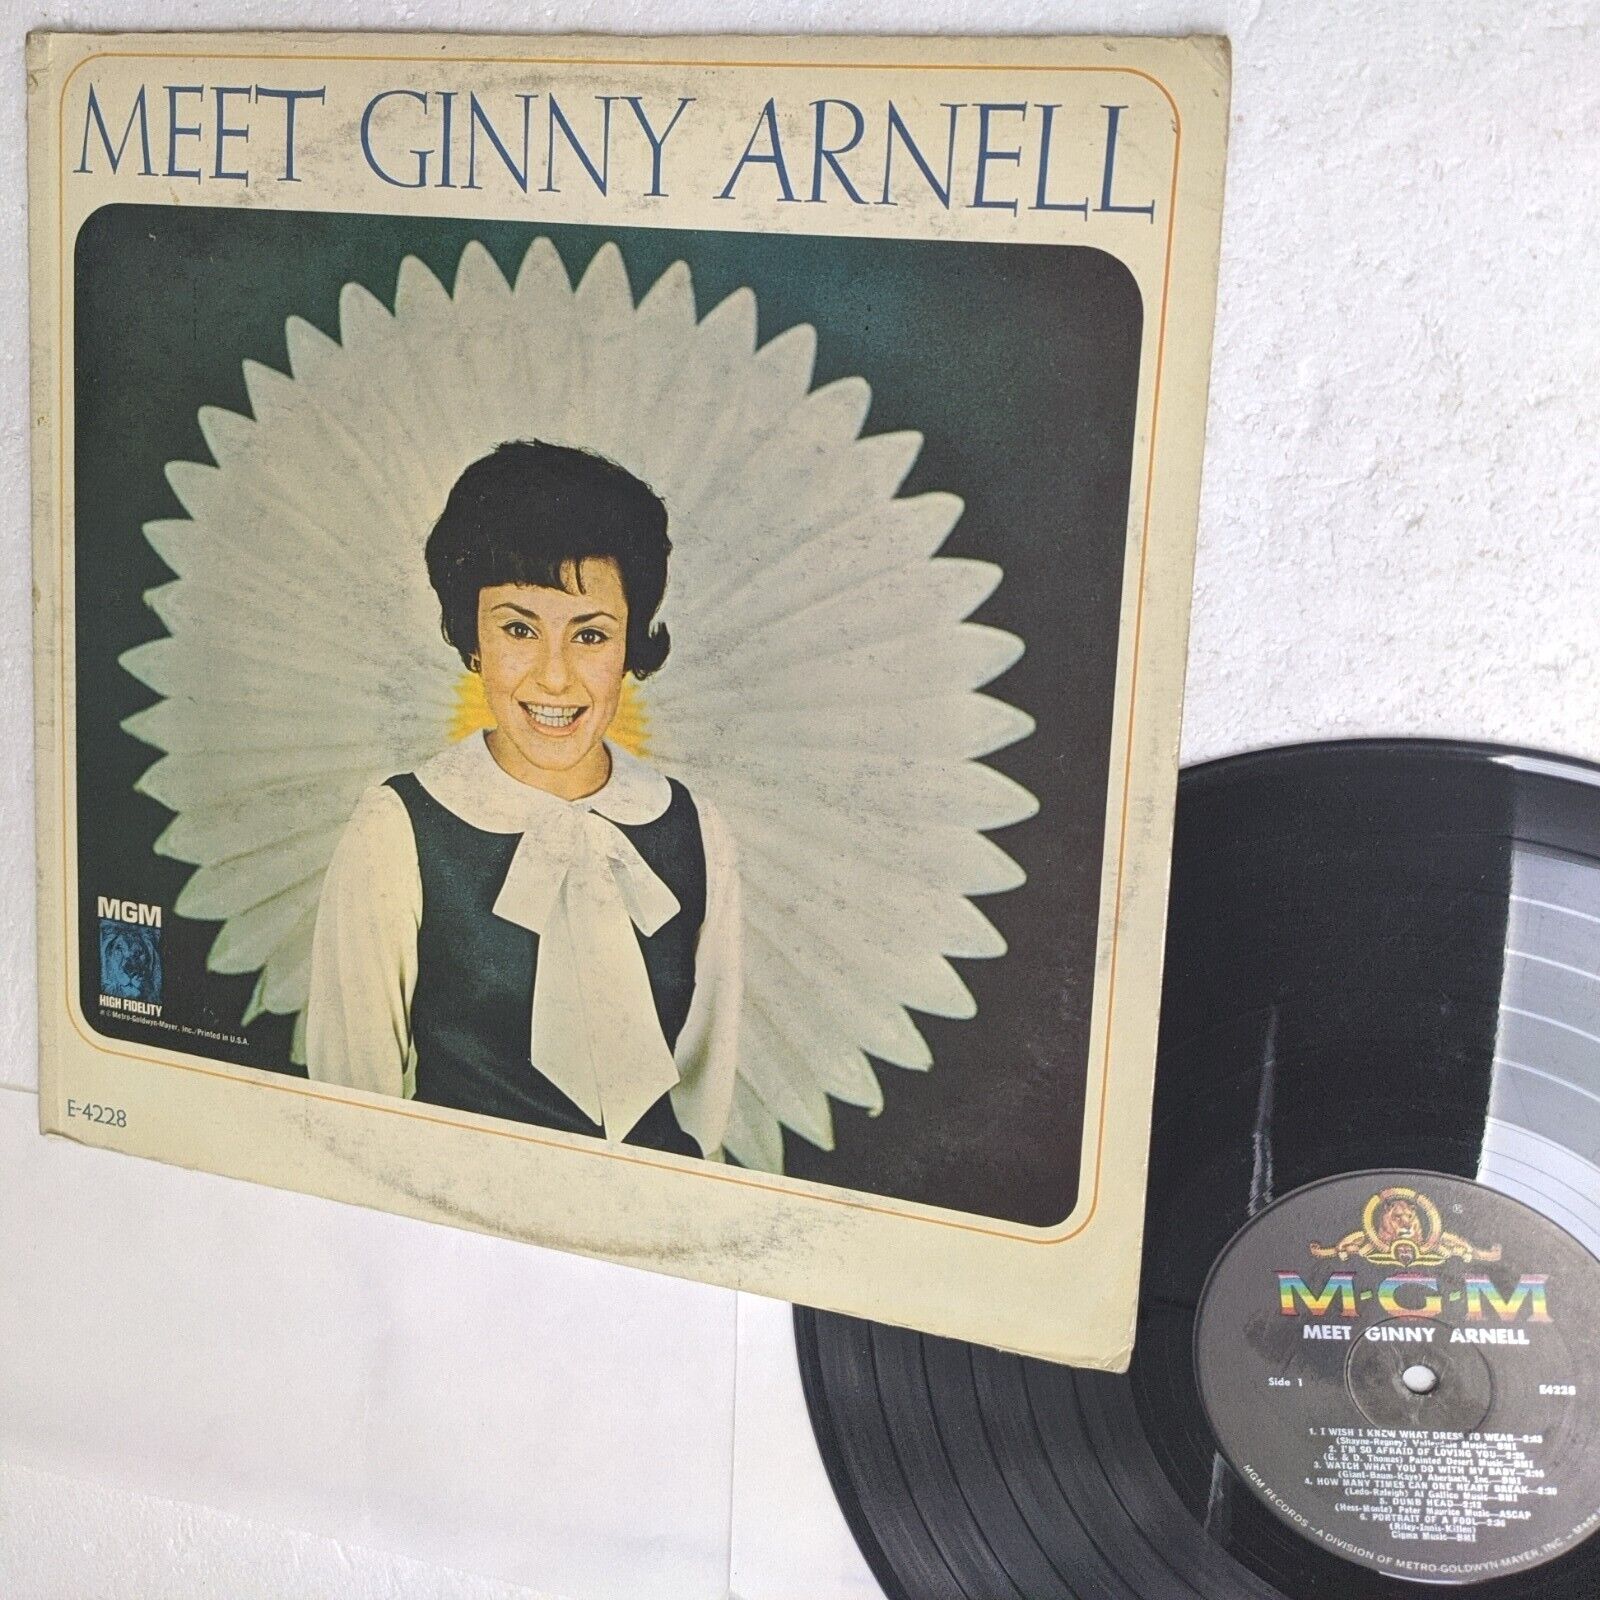 Meet Ginny Arnell MGM Records early MONO pressing TEEN girl COUNTRY POP  mc 702